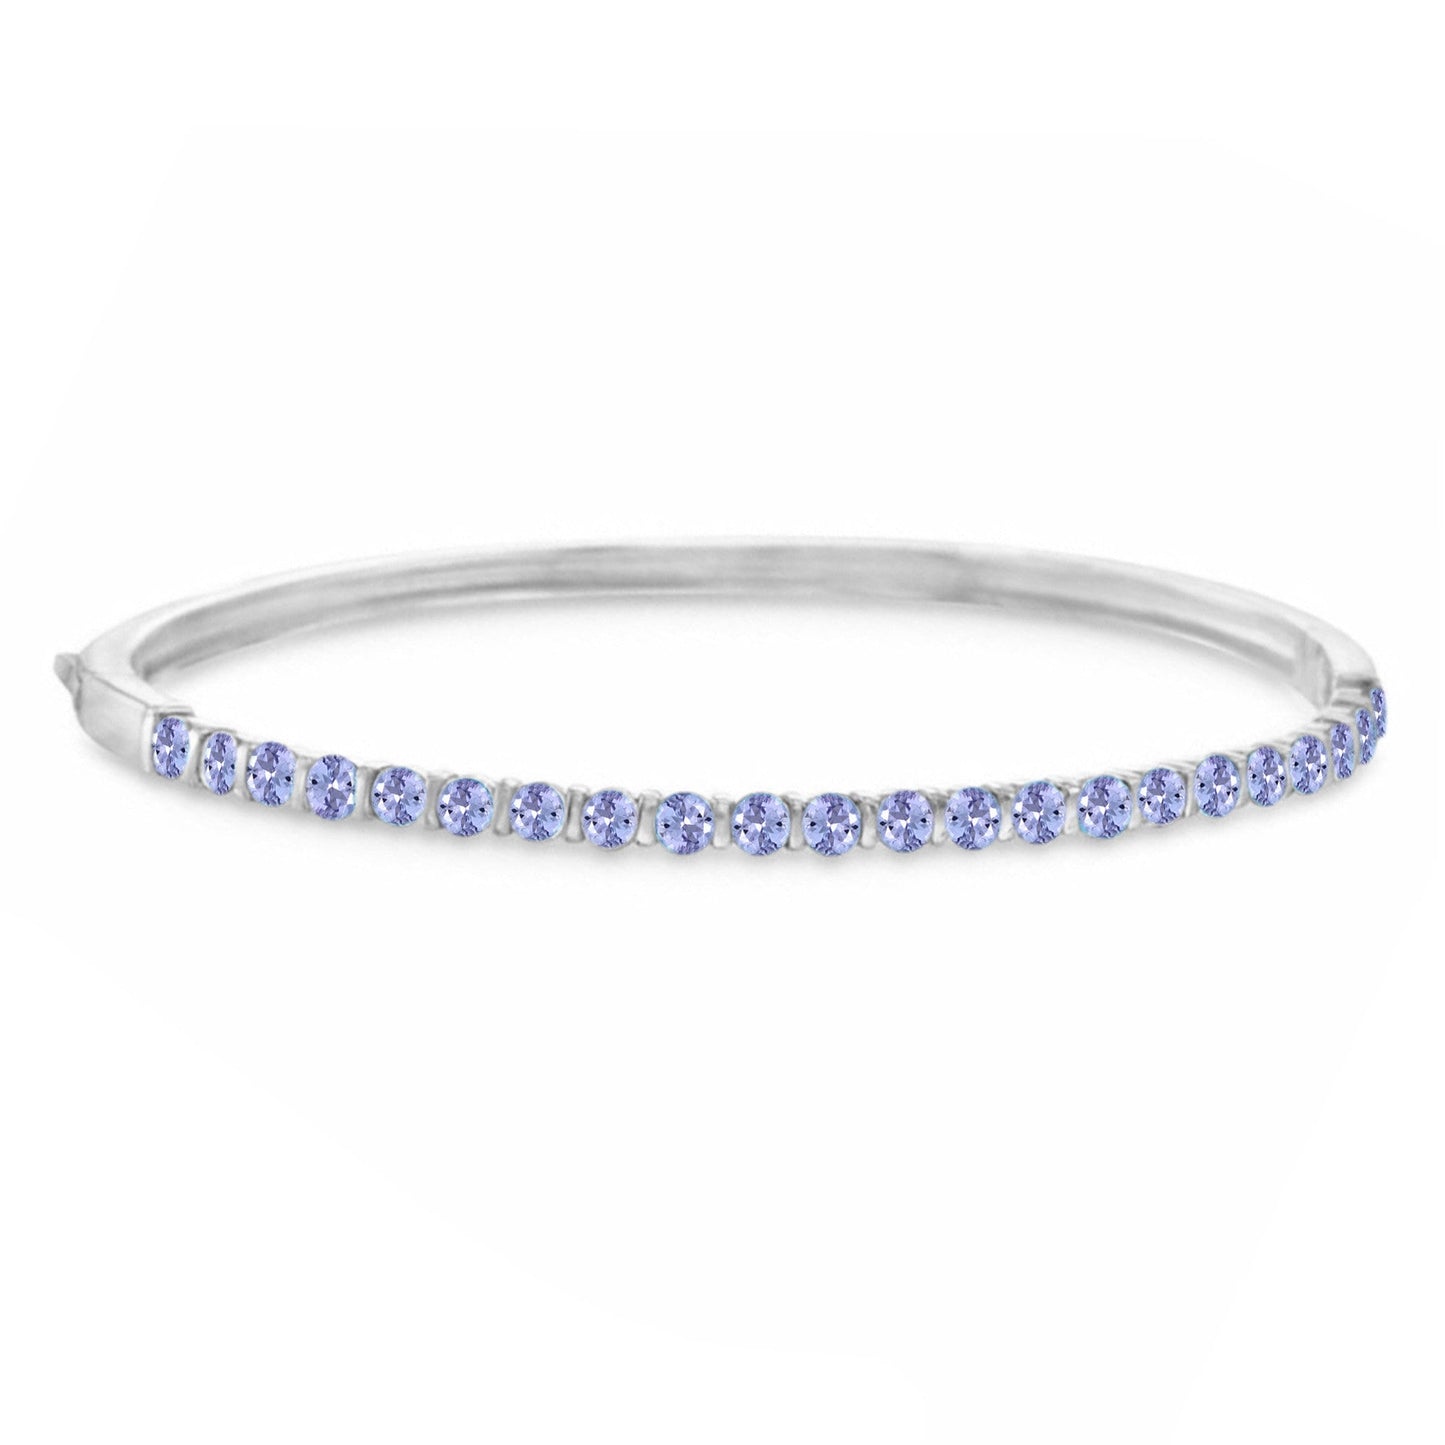 Natural Tanzanite Gemstone Bangle, 925 Sterling Silver Bangle, Anniversary Gift, Gift For Her